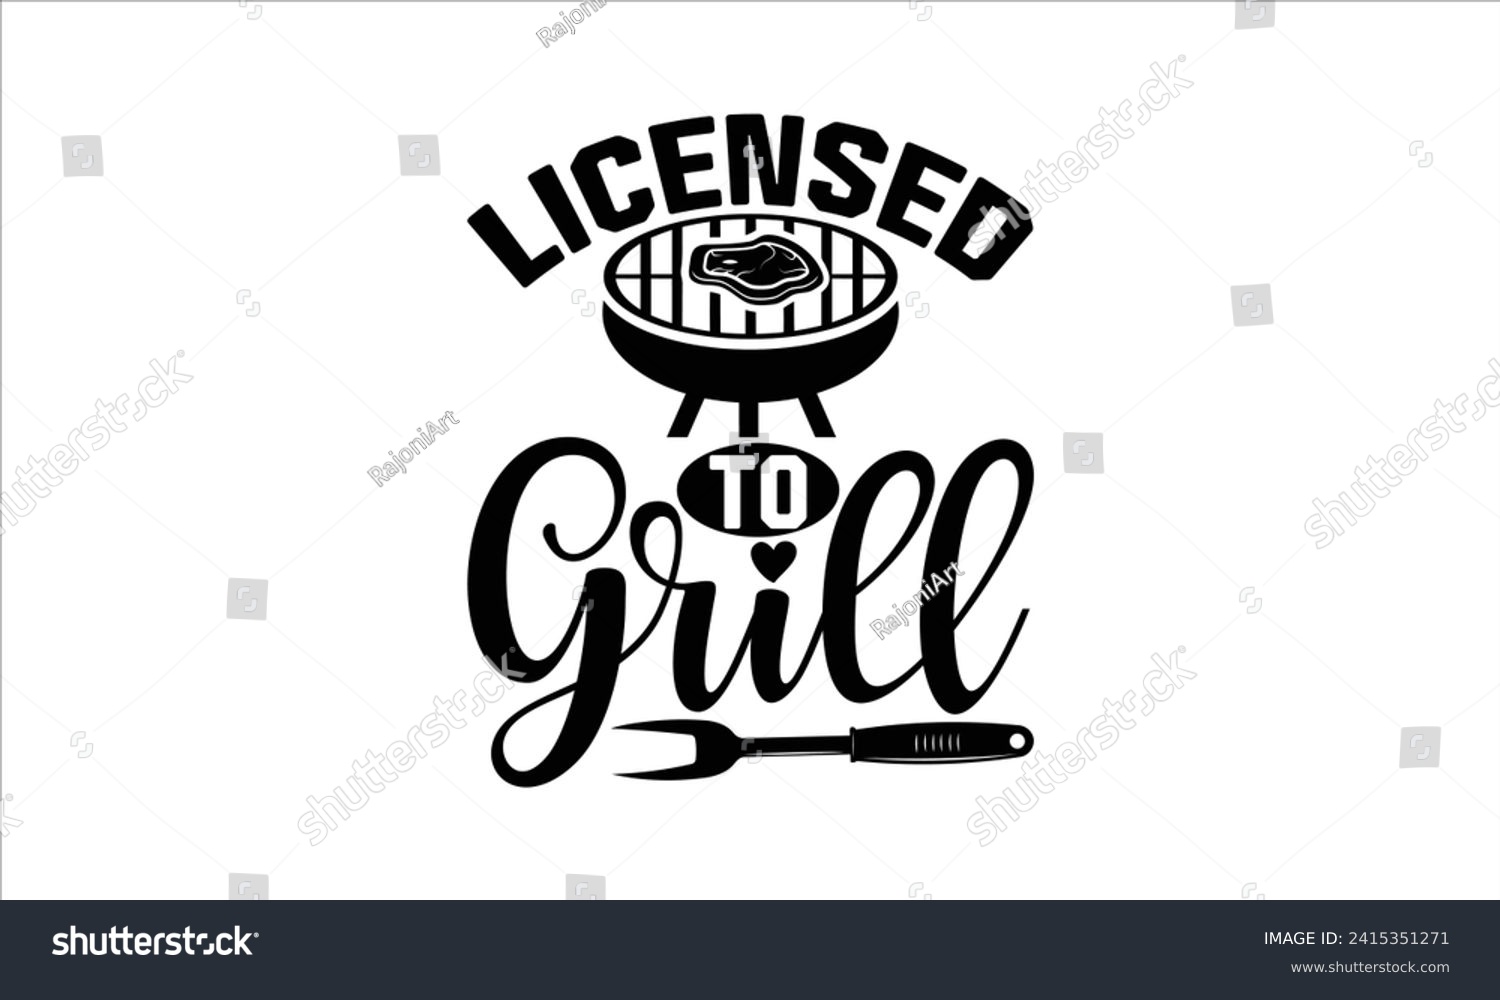 SVG of Licensed to grill - Barbecue T-Shirt Design, Modern calligraphy, Vector illustration with hand drawn lettering, posters, banners, cards, mugs, Notebooks, white background. svg